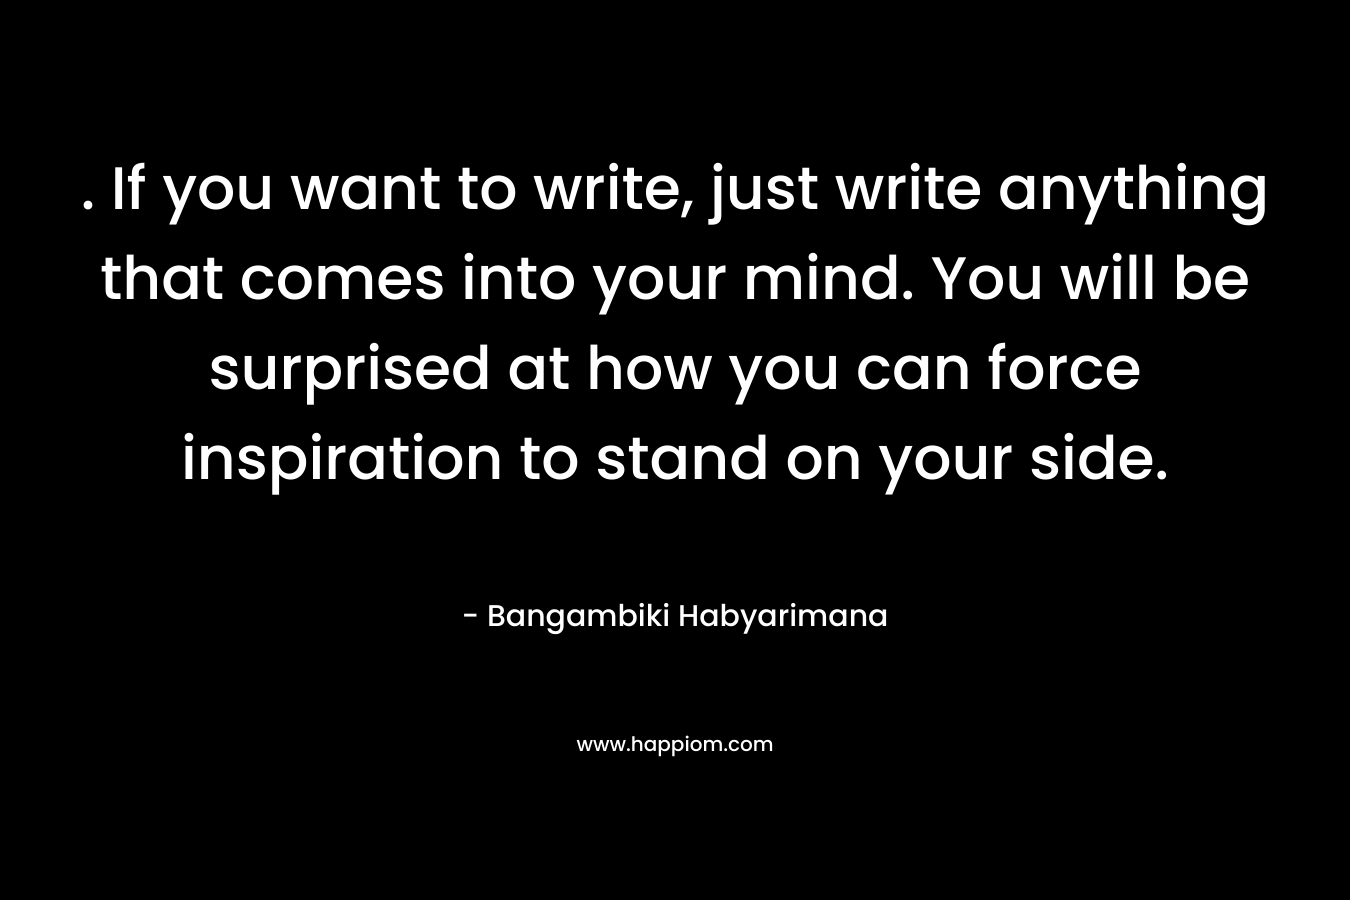 . If you want to write, just write anything that comes into your mind. You will be surprised at how you can force inspiration to stand on your side.